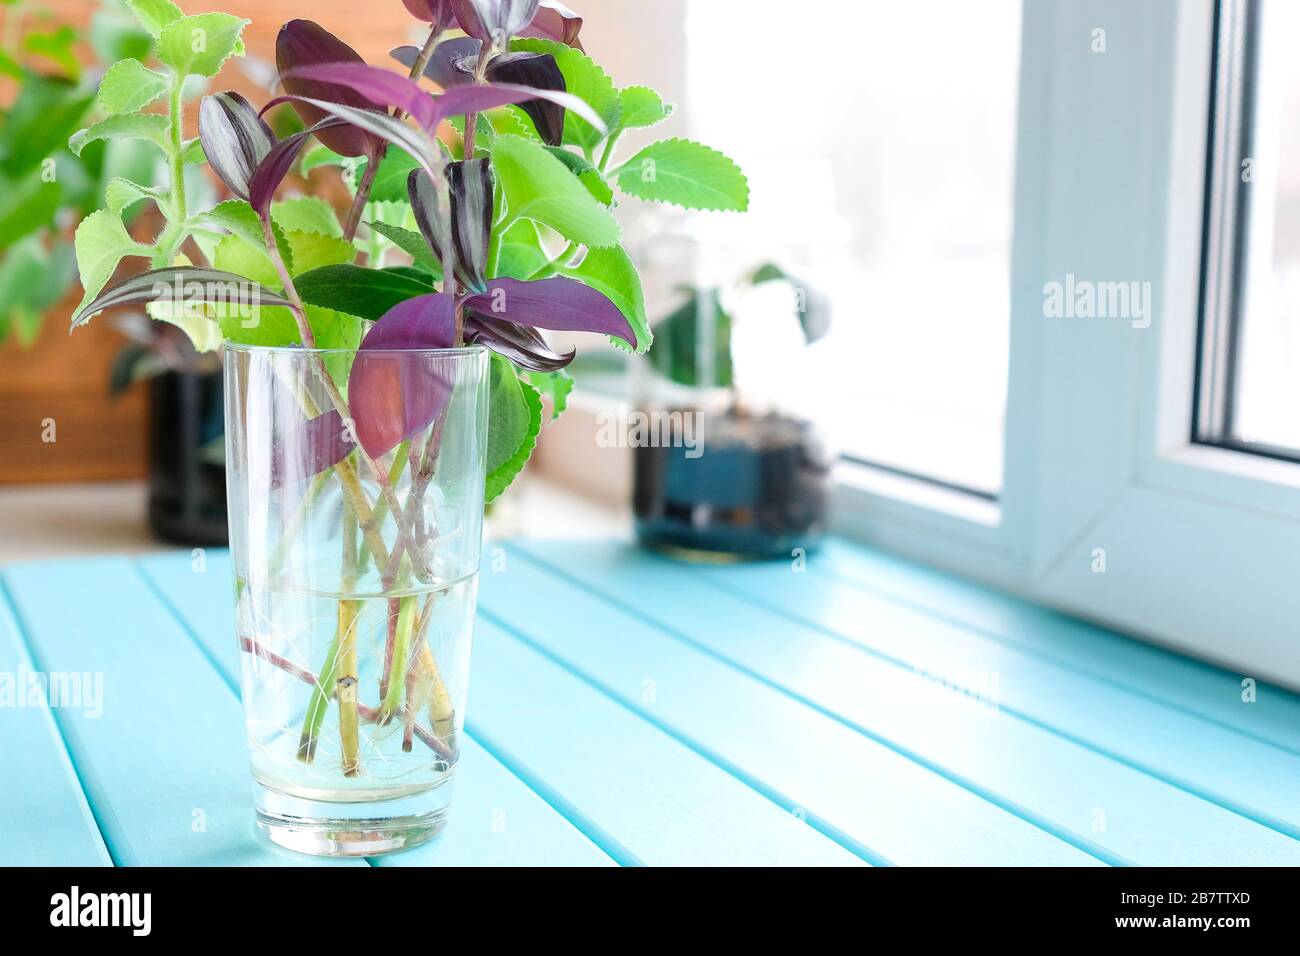 Zebrina and amboynikus take roots. Green and burgundy sprouts in the water. Plants in a glass. Stock Photo